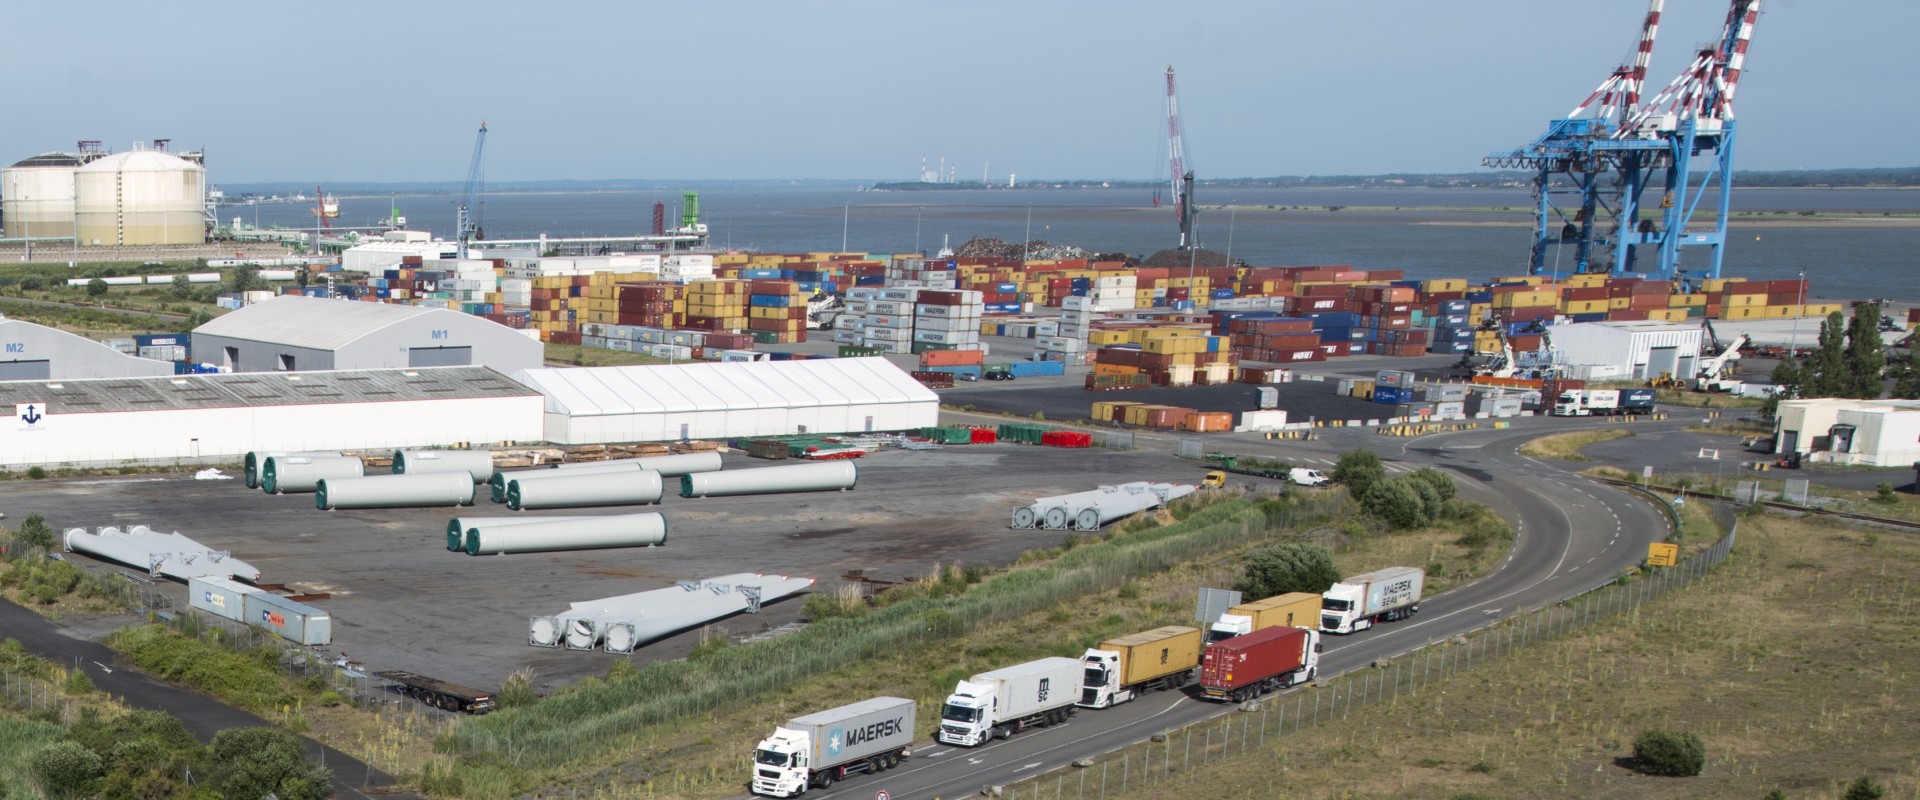 Smooth Ports Project: the Good Practices of Nantes ‒ Saint Nazaire Port